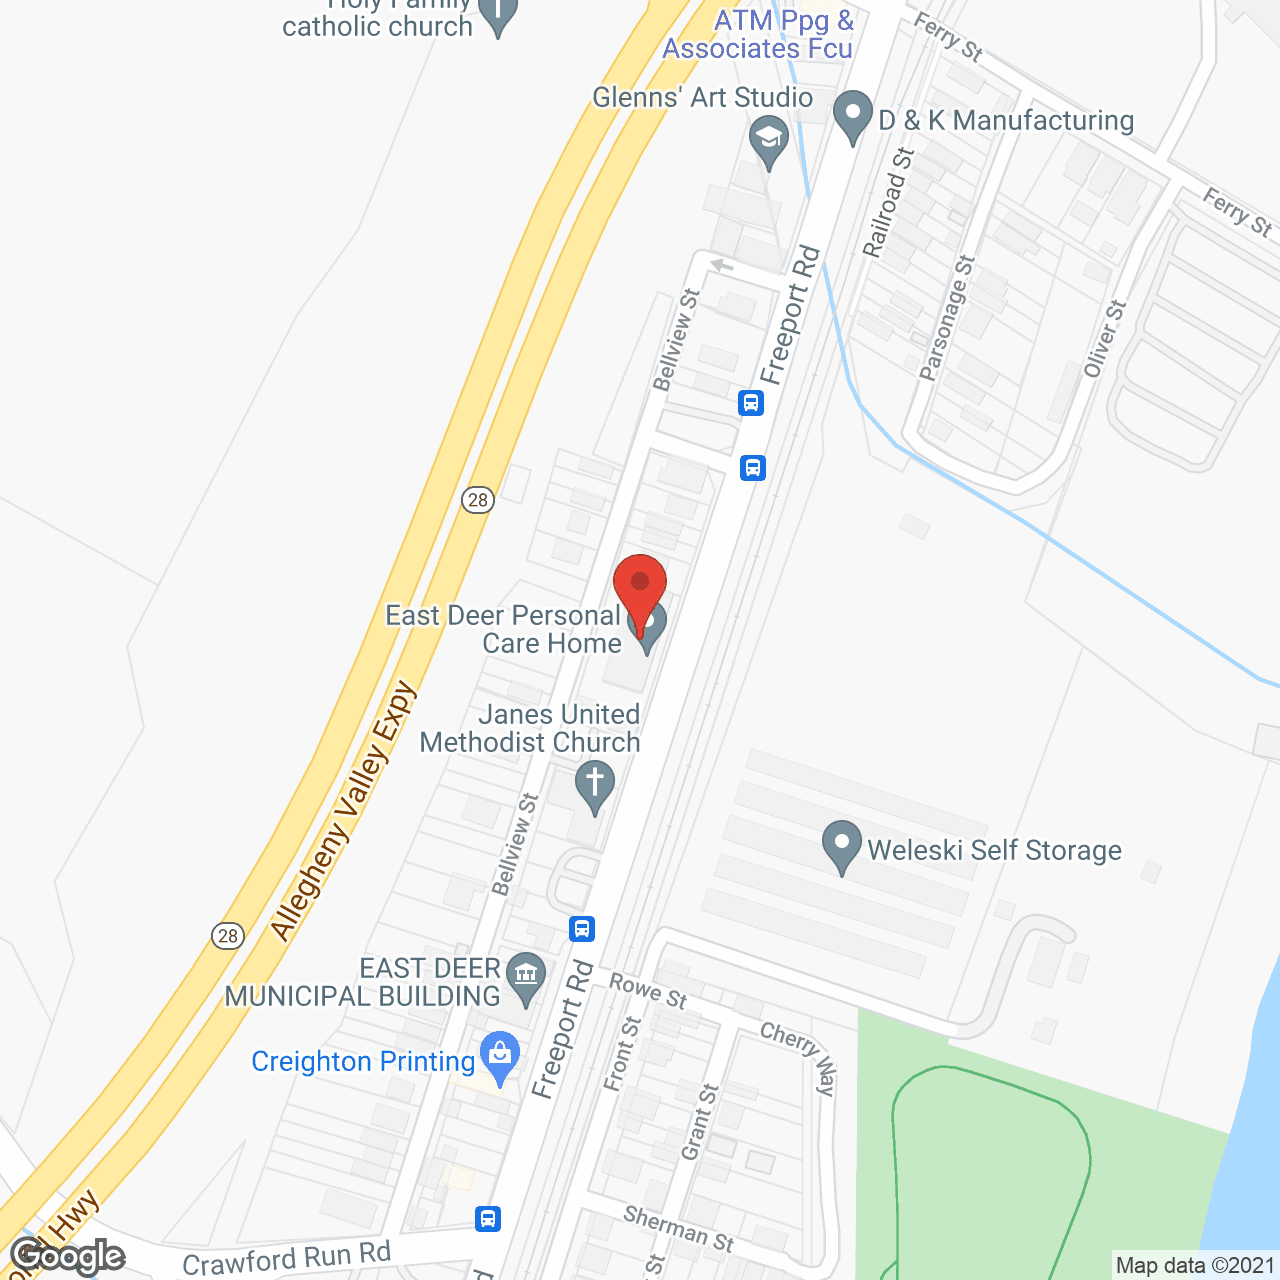 East Deer Personal Care Home in google map